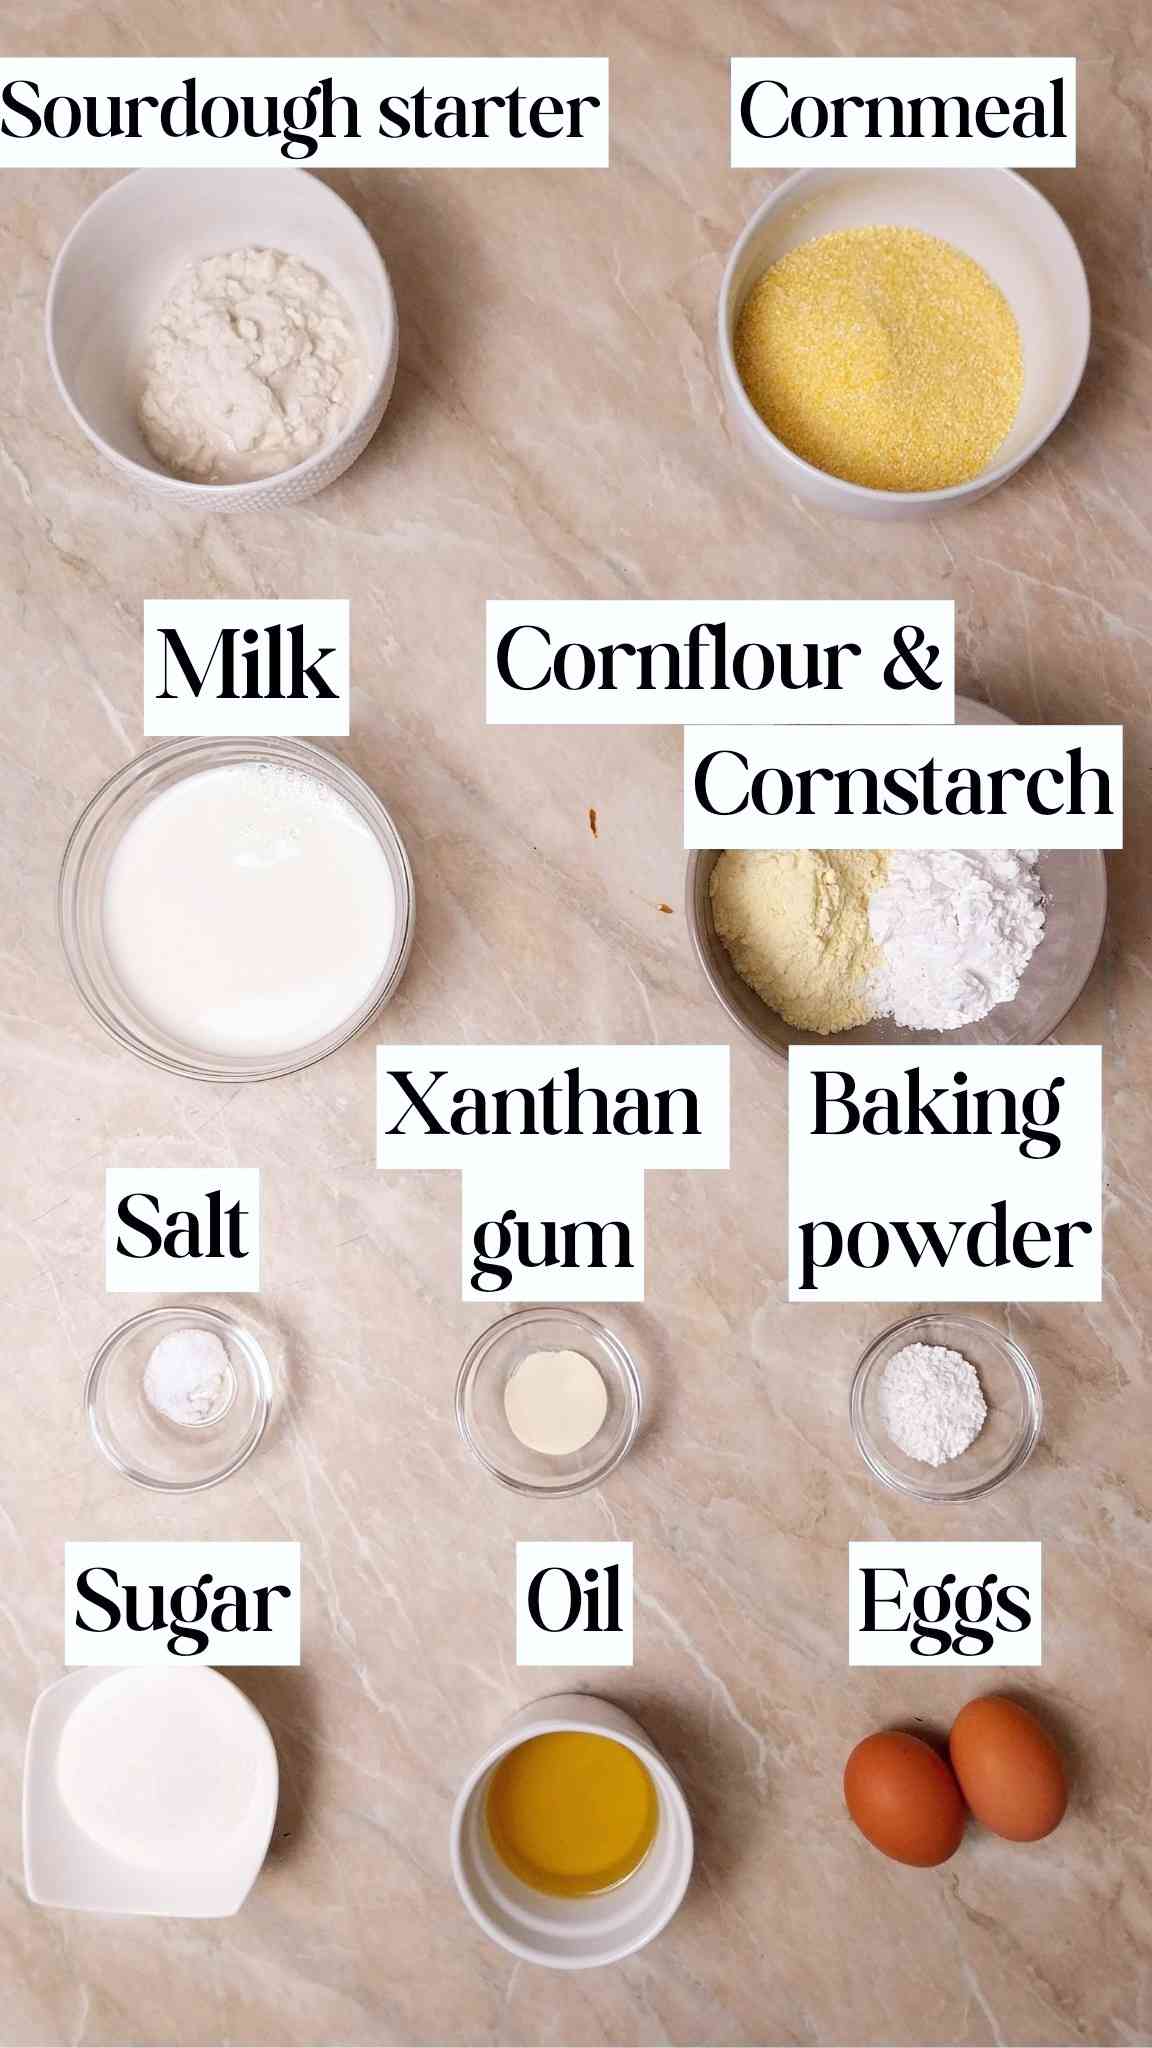 Ingredients on a kitchen counter.